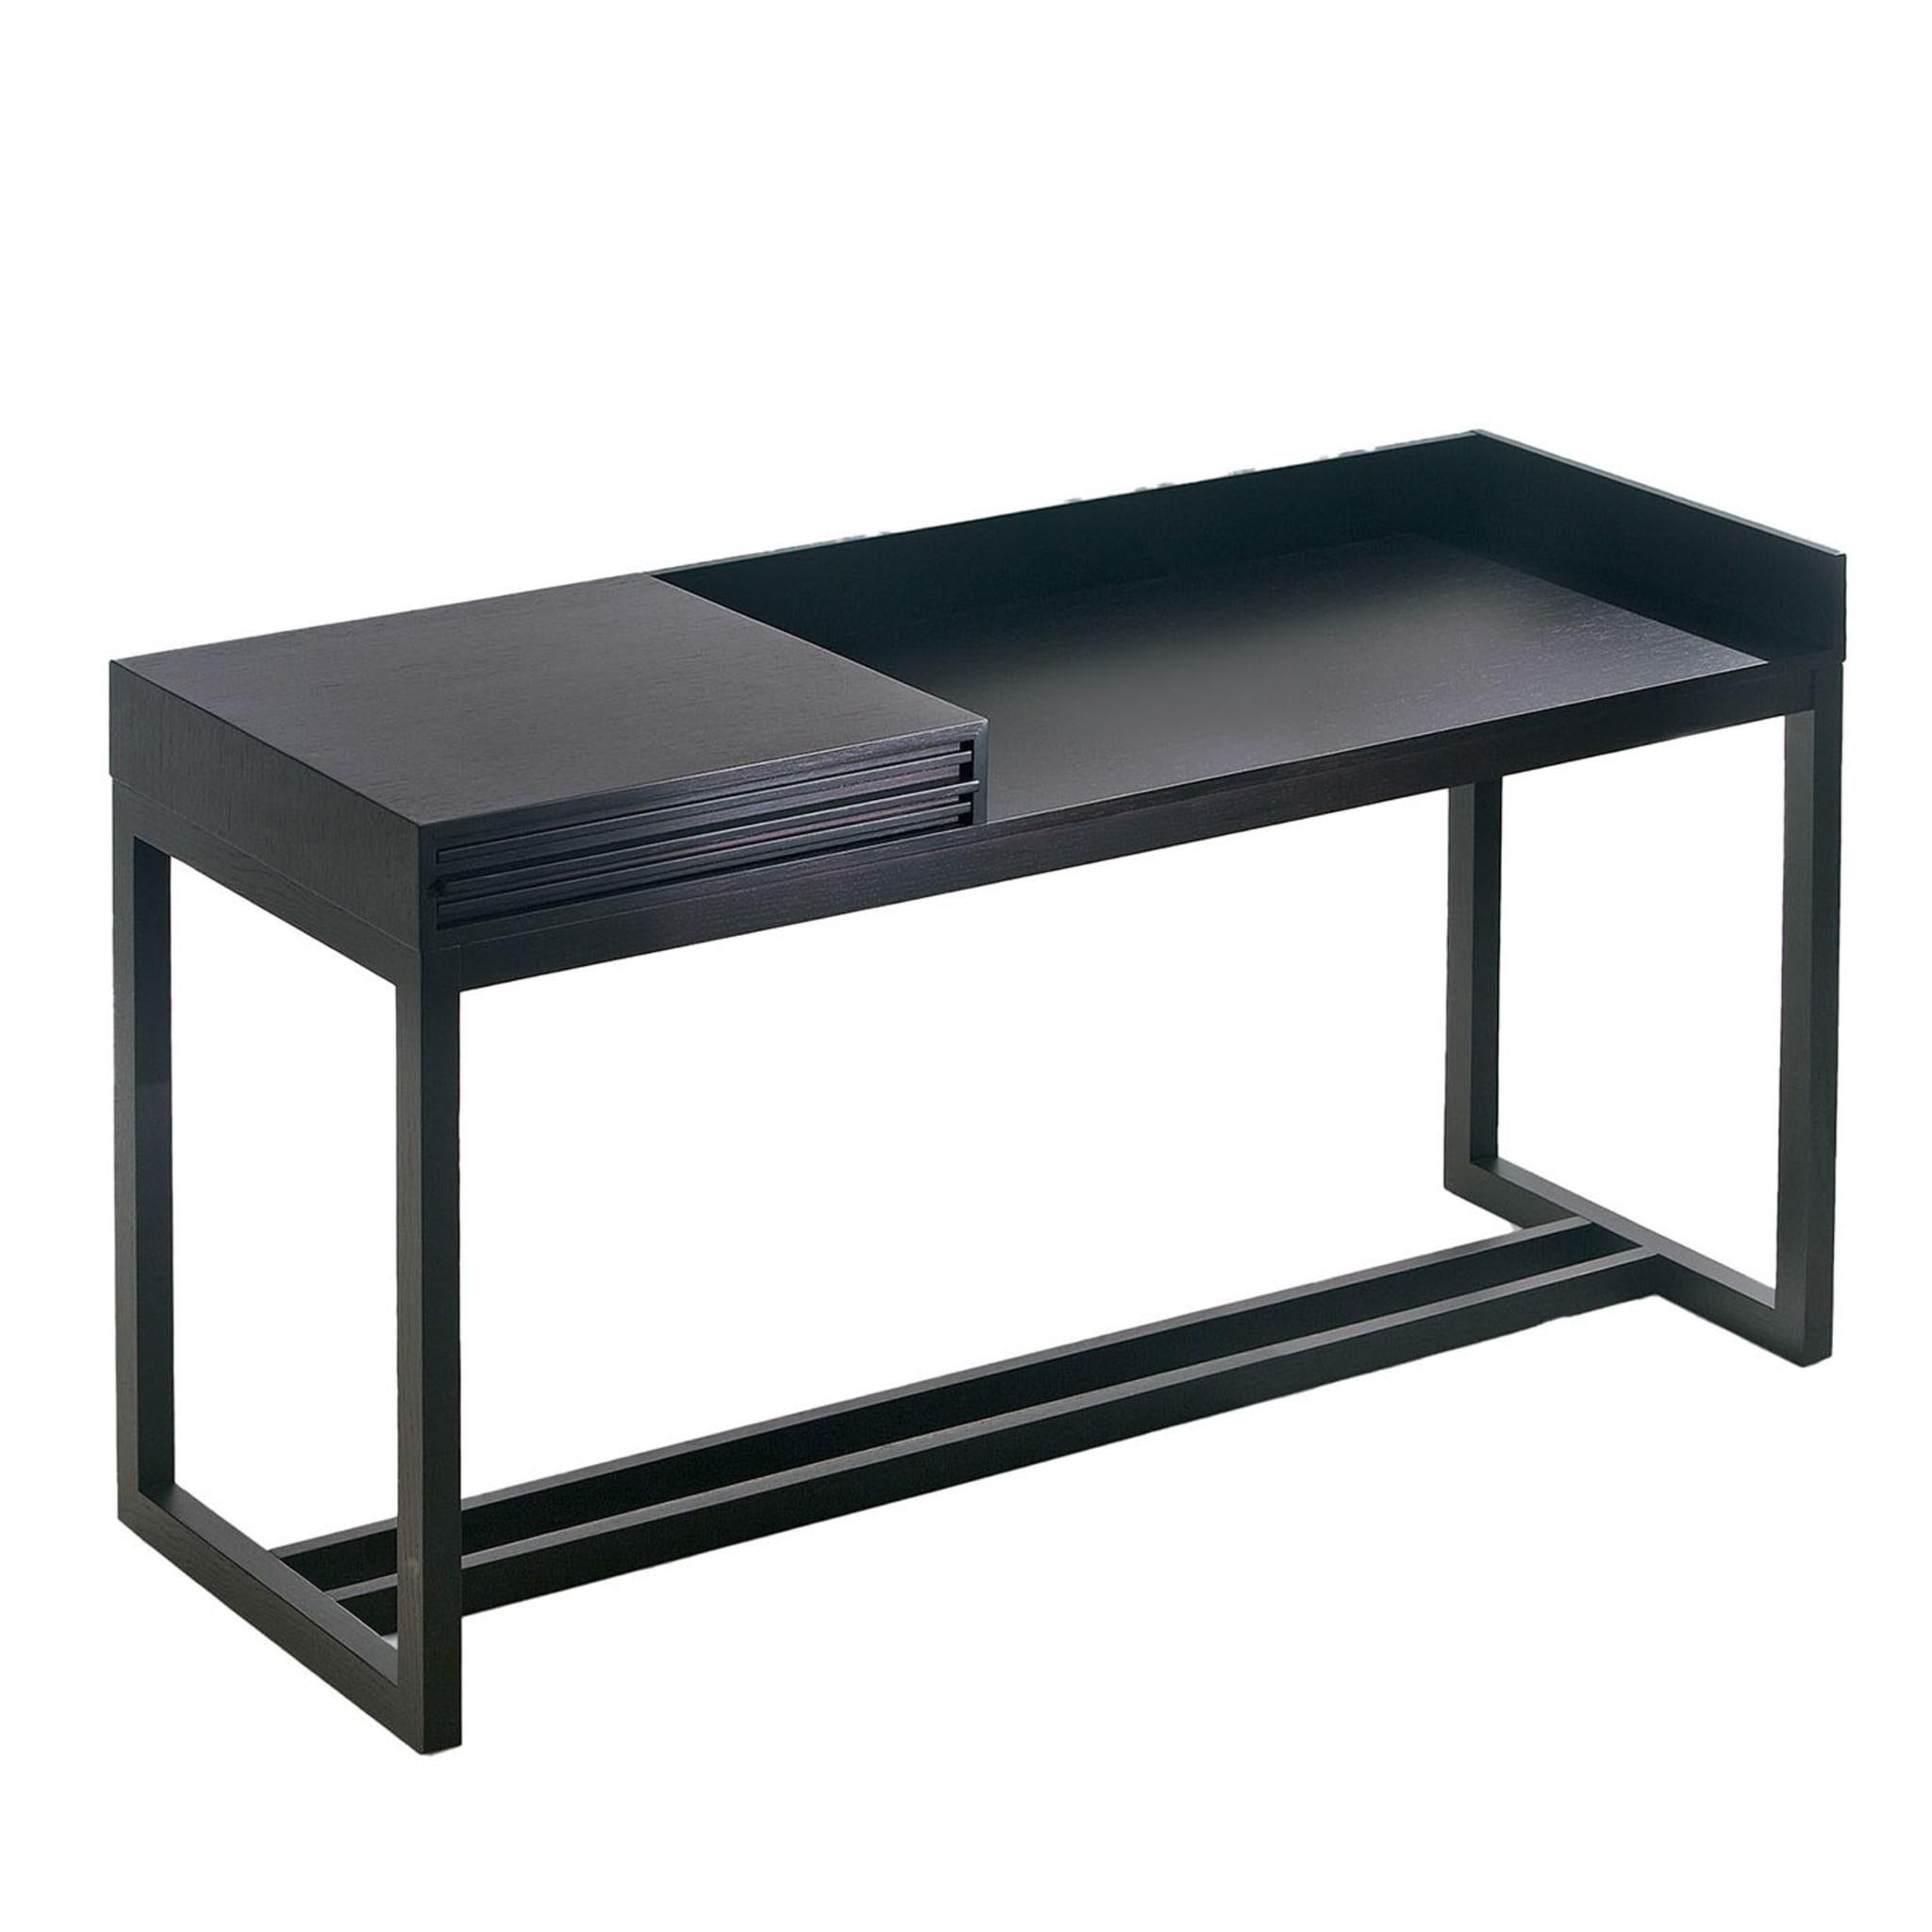 Designed by Fabio Rebosio, this desk merges style with functionality. The solid Ash structure is entirely lacquered in a rich black veneer which enhances the sleek angular lines comprising the piece. The rectangular top is supported by two lateral